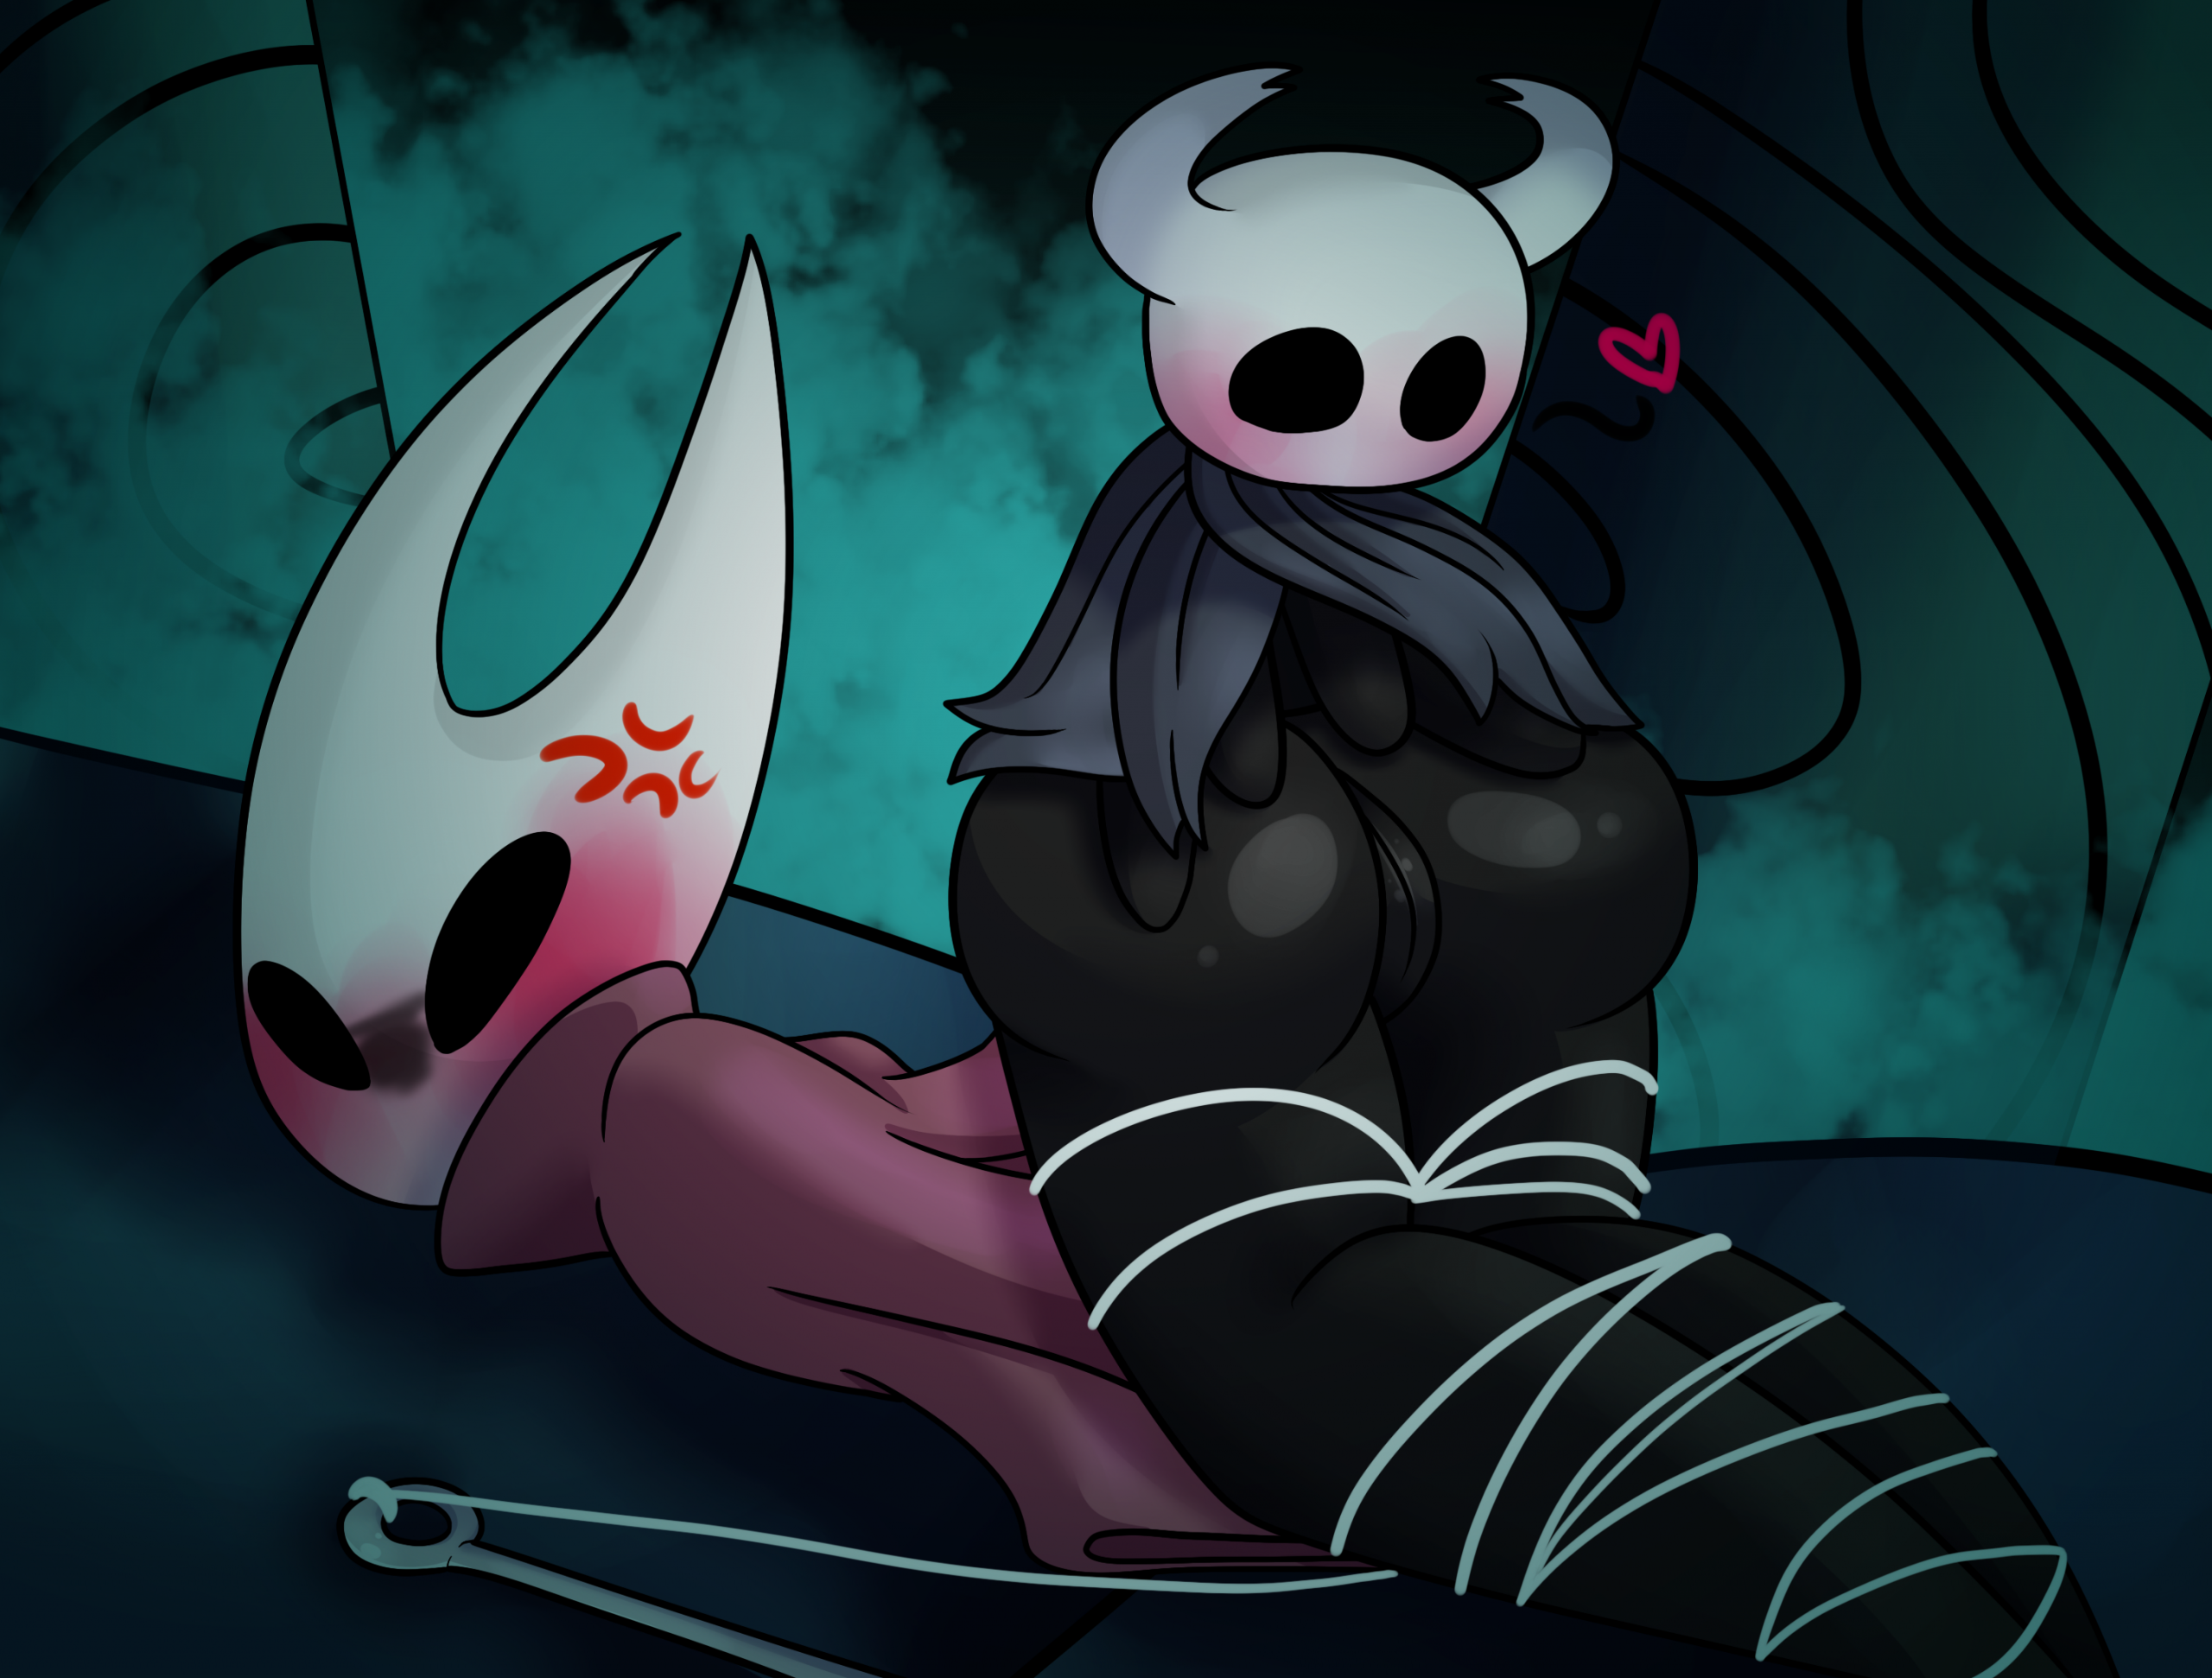 Insert creative title about hollow knight free porn photos